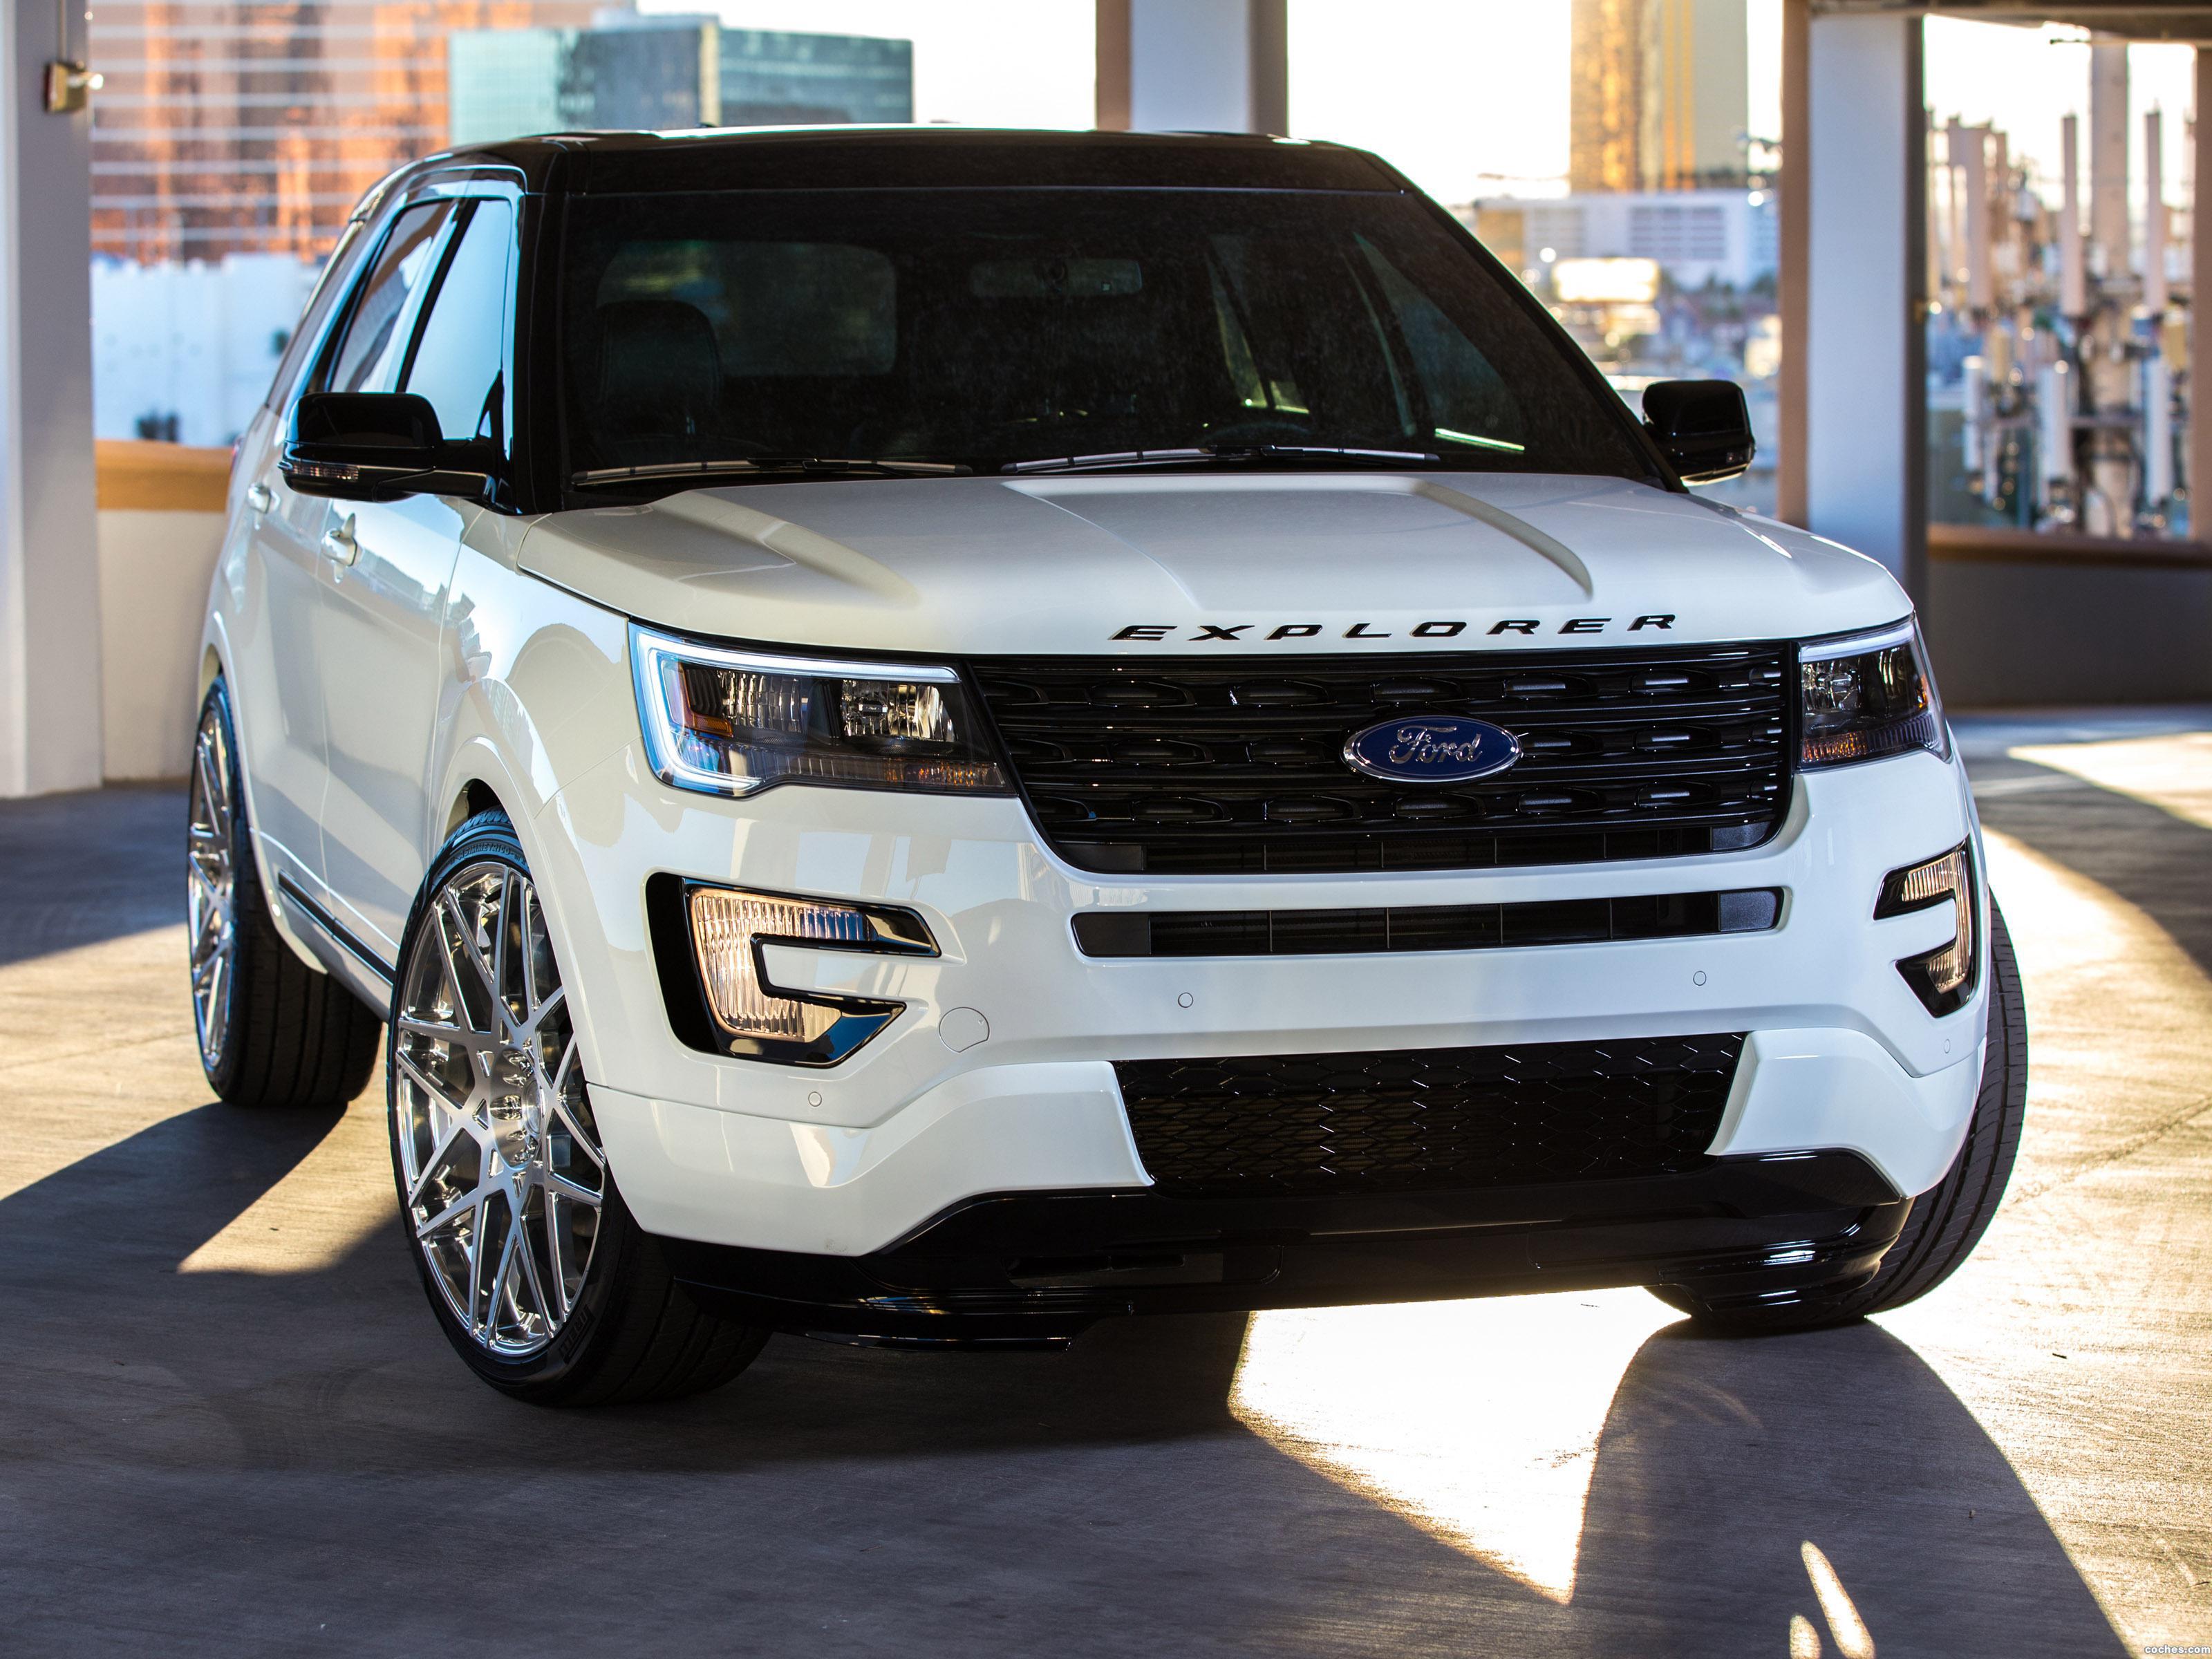 ford_explorer-sport-by-mad-industries-2015_r1.jpg